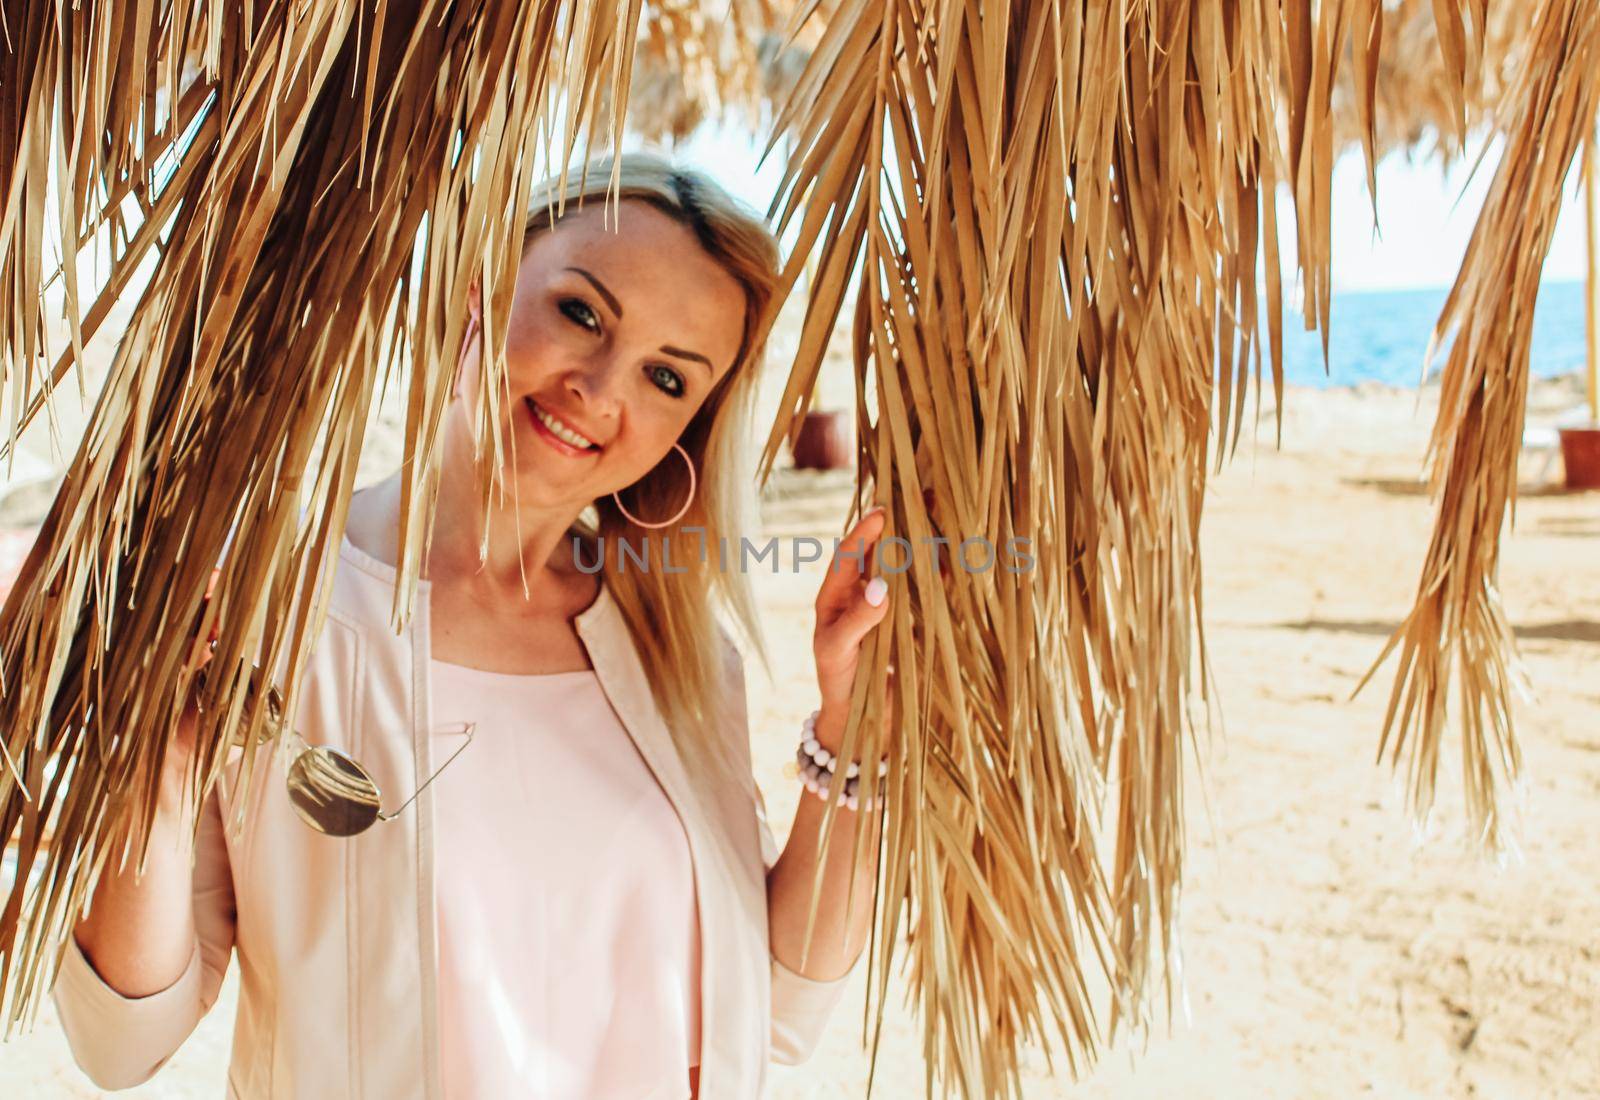 Beautiful blonde woman on a background of dry leaves and palm branches on the beach. Blonde girl wearing pink clothes Against the background of palm trees and the sea. Enjoys vacation in Egypt.